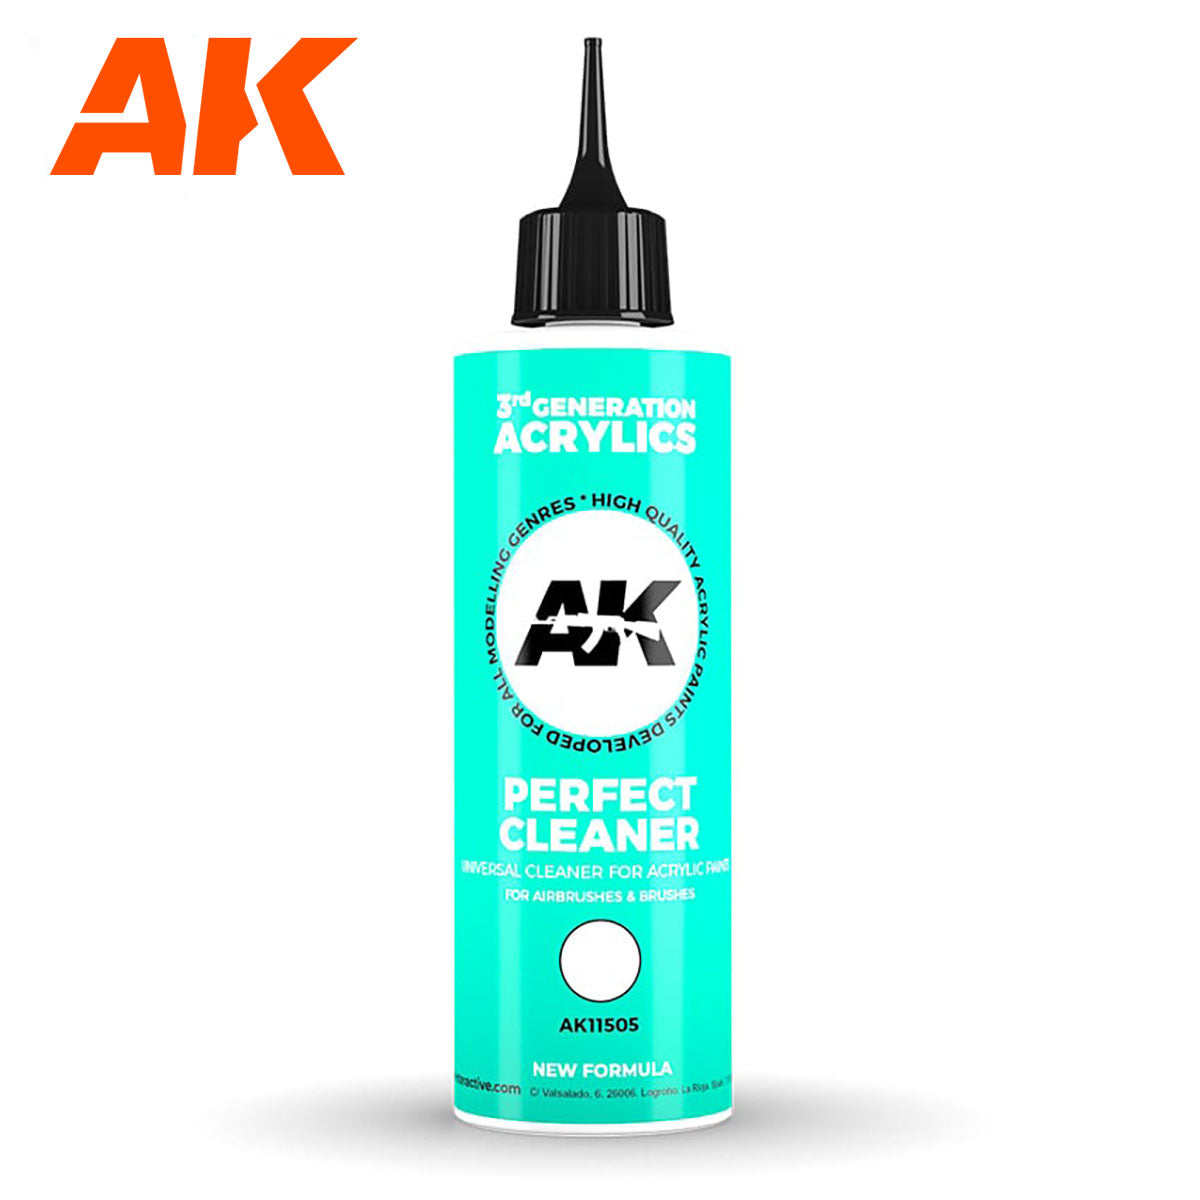 AK Interactive Auxuliaries - 3GEN PERFECT CLEANER